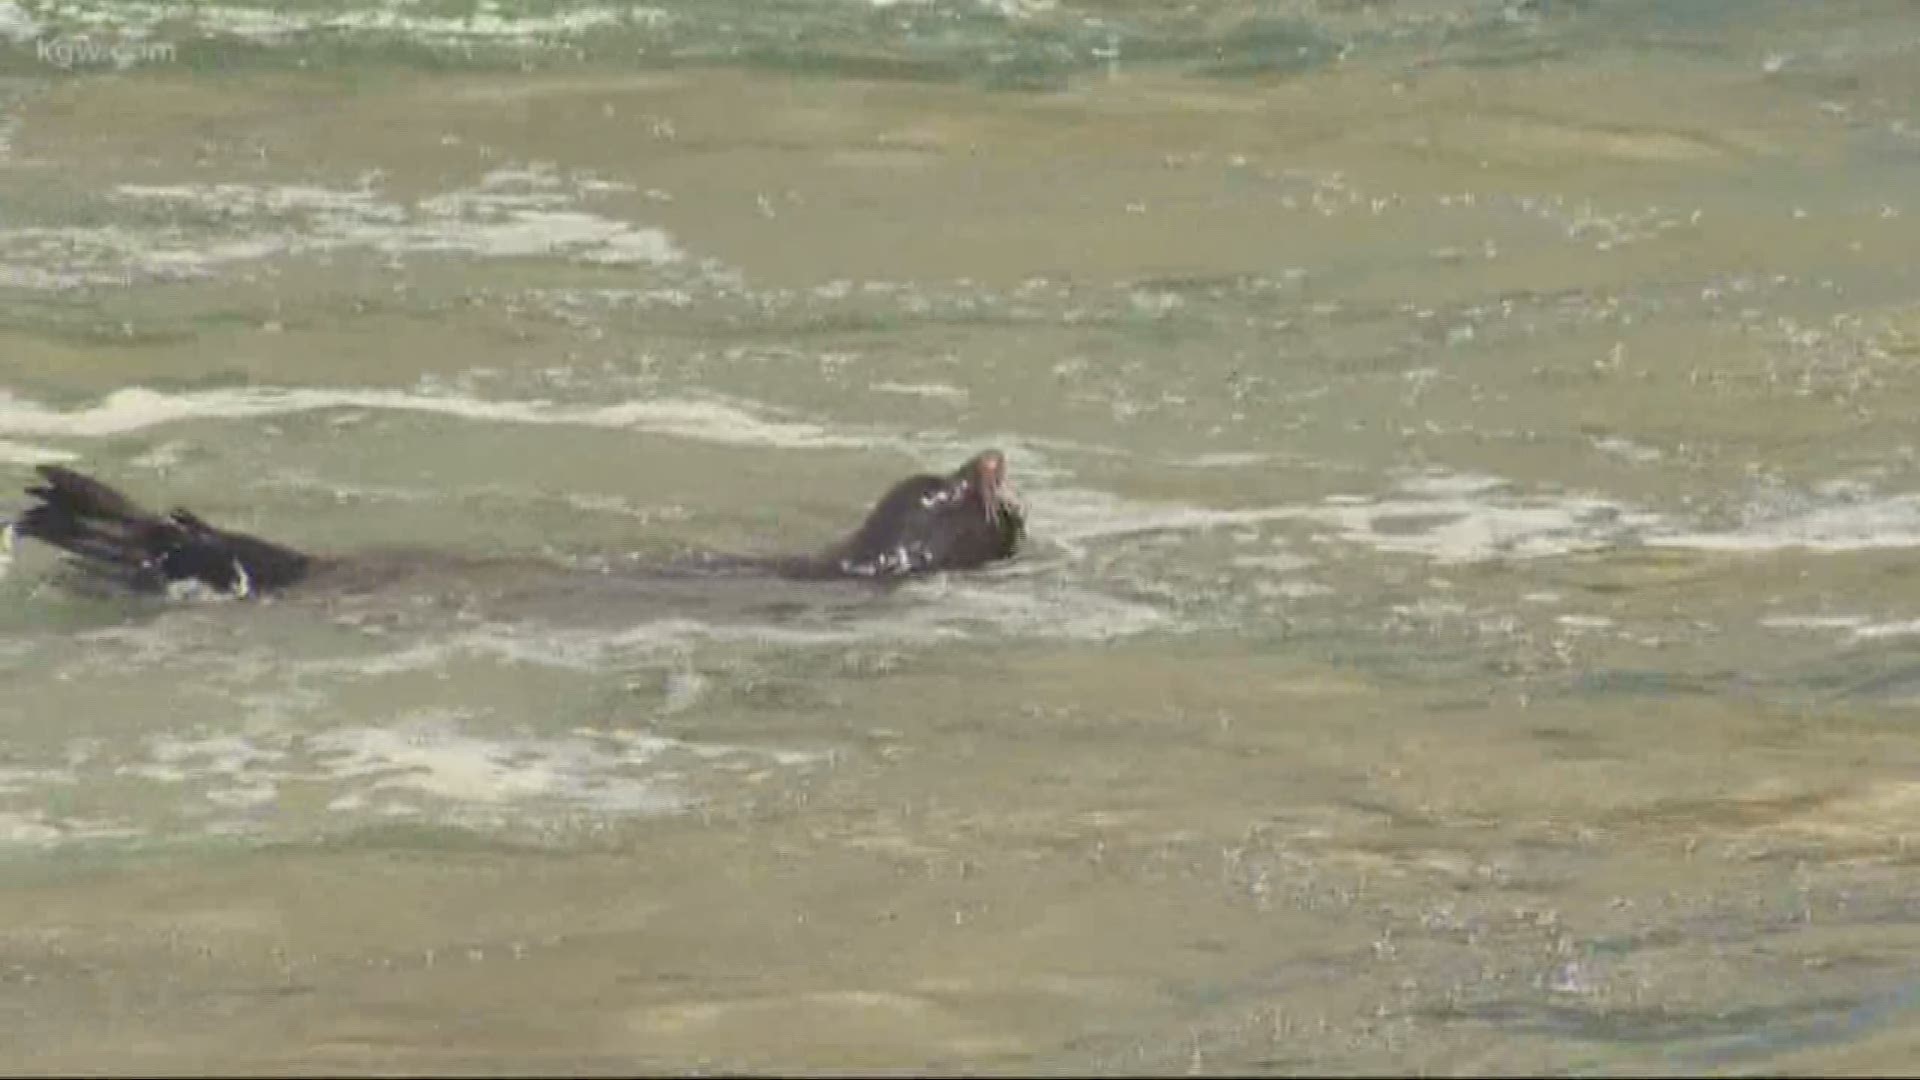 Wildlife officials say killing sea lions is important to save fish.